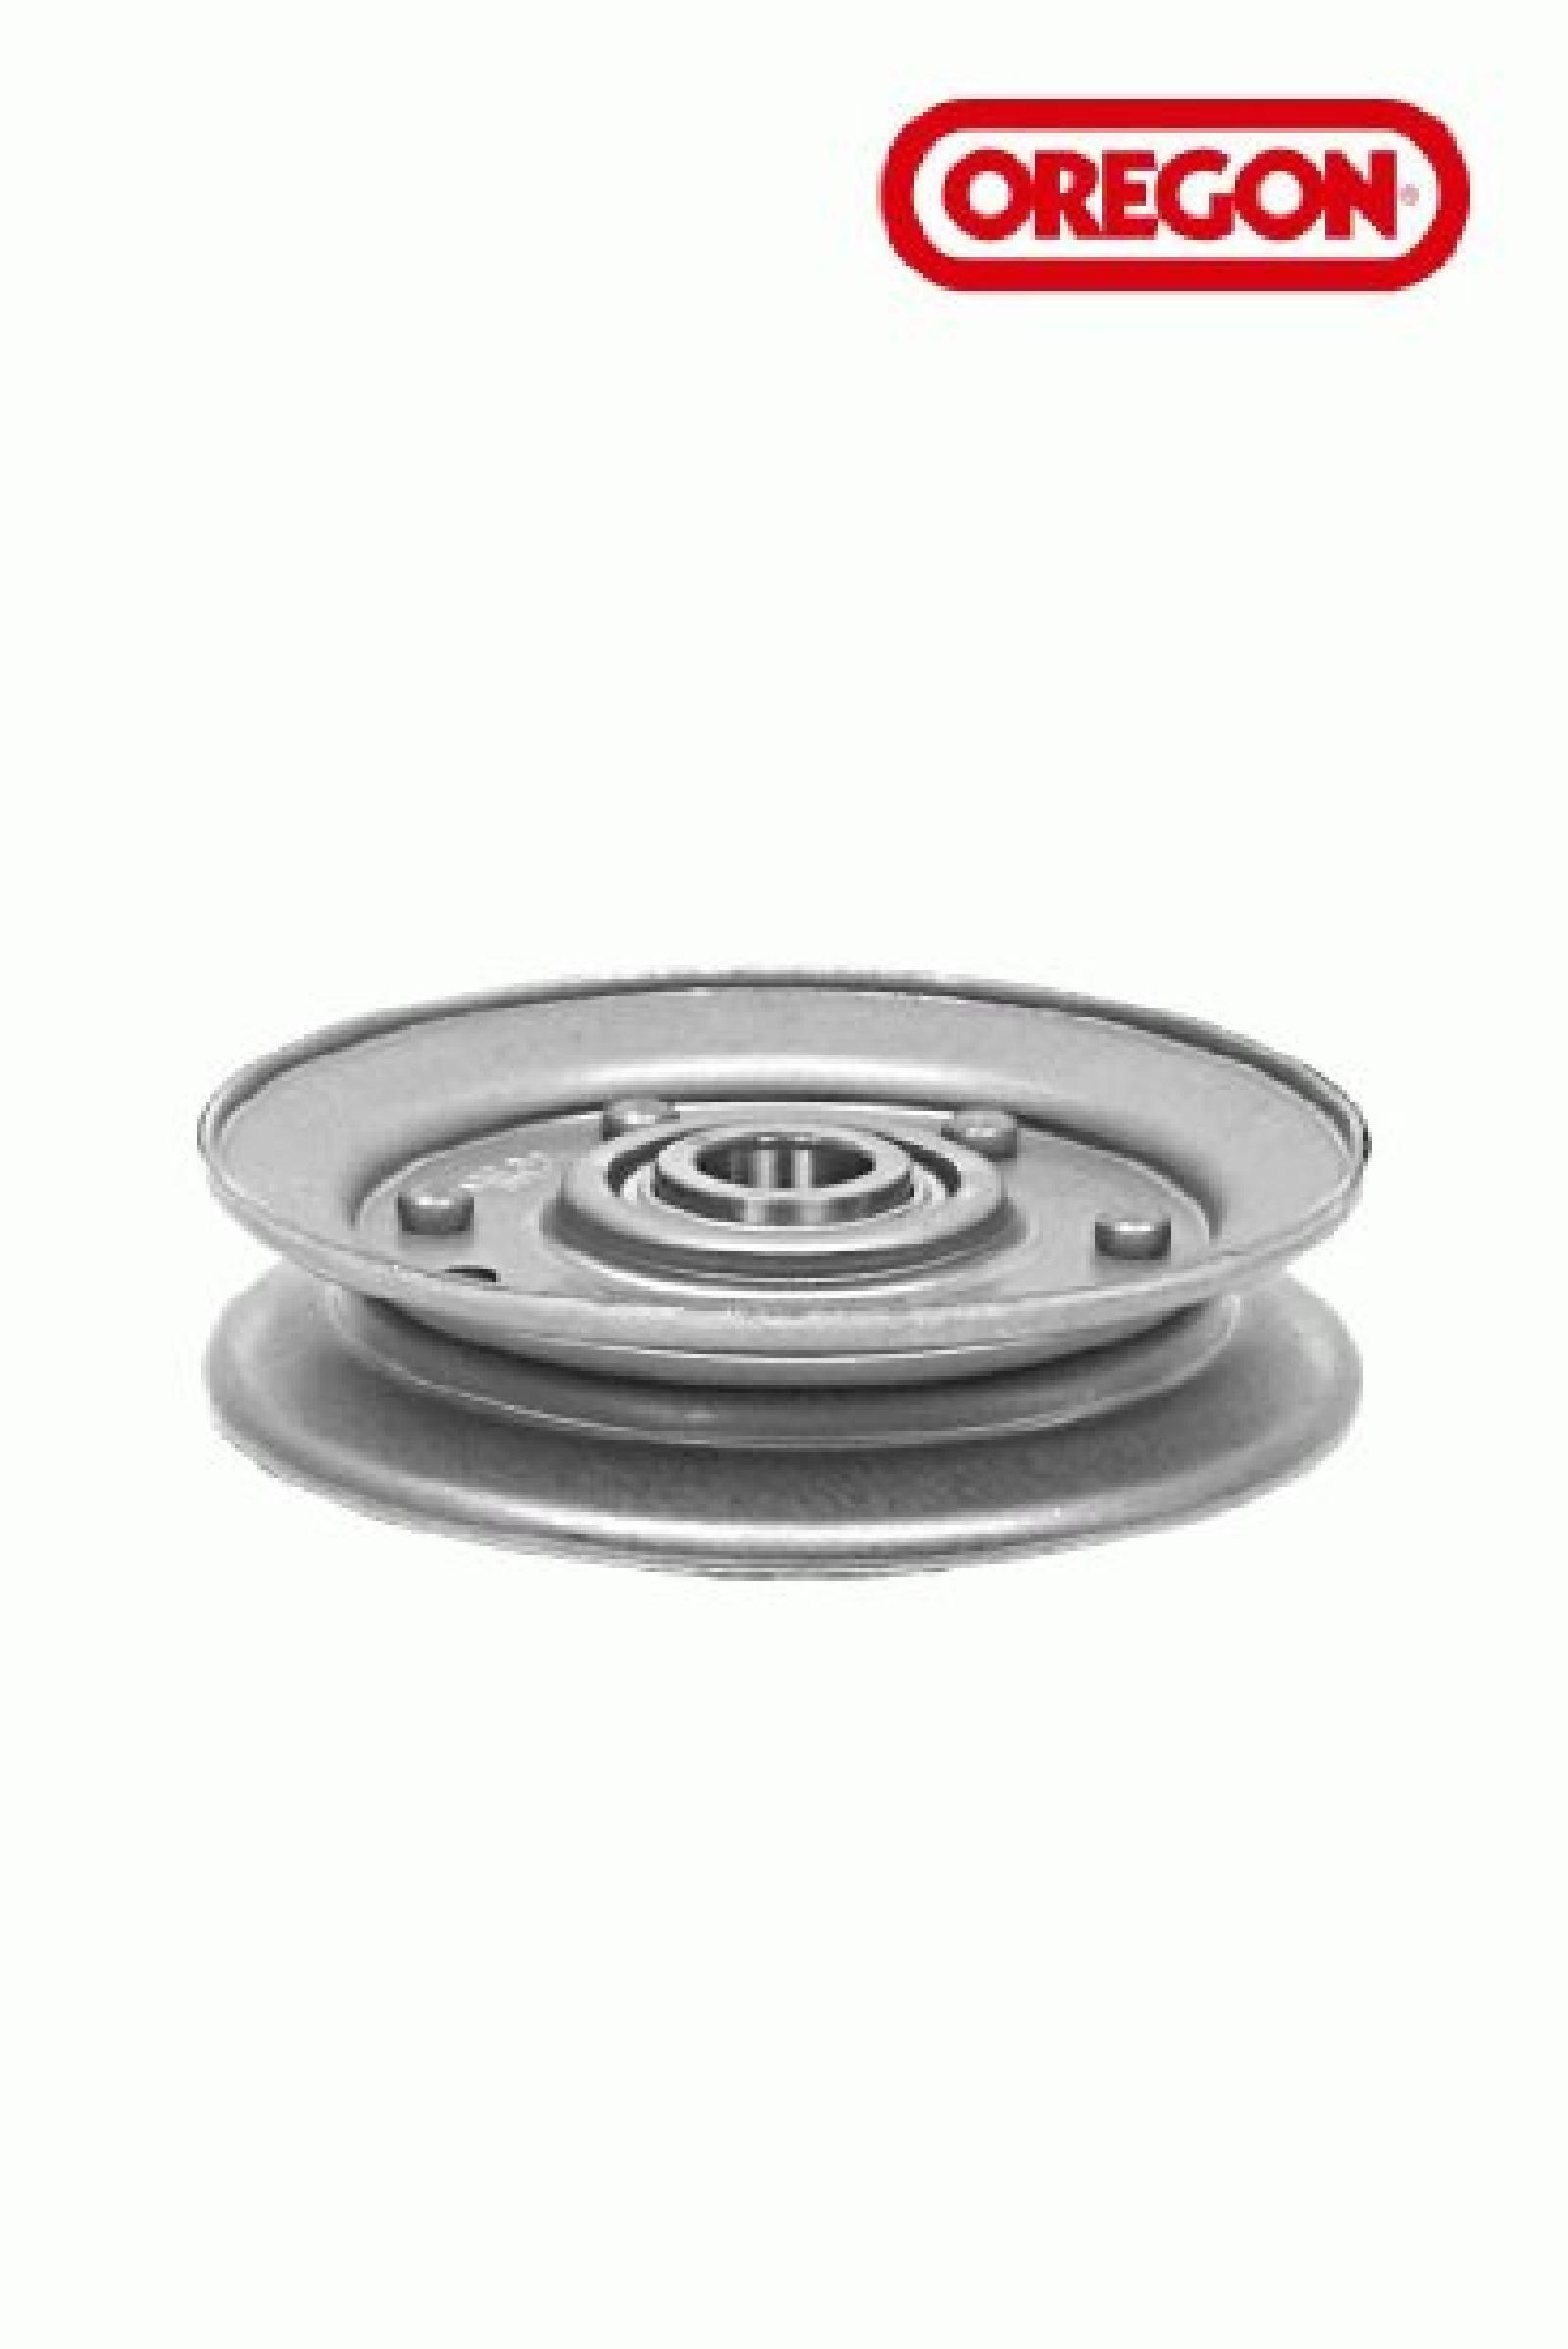 PULLEY, V IDLER DIXIE CHO part# 78-010 by Oregon